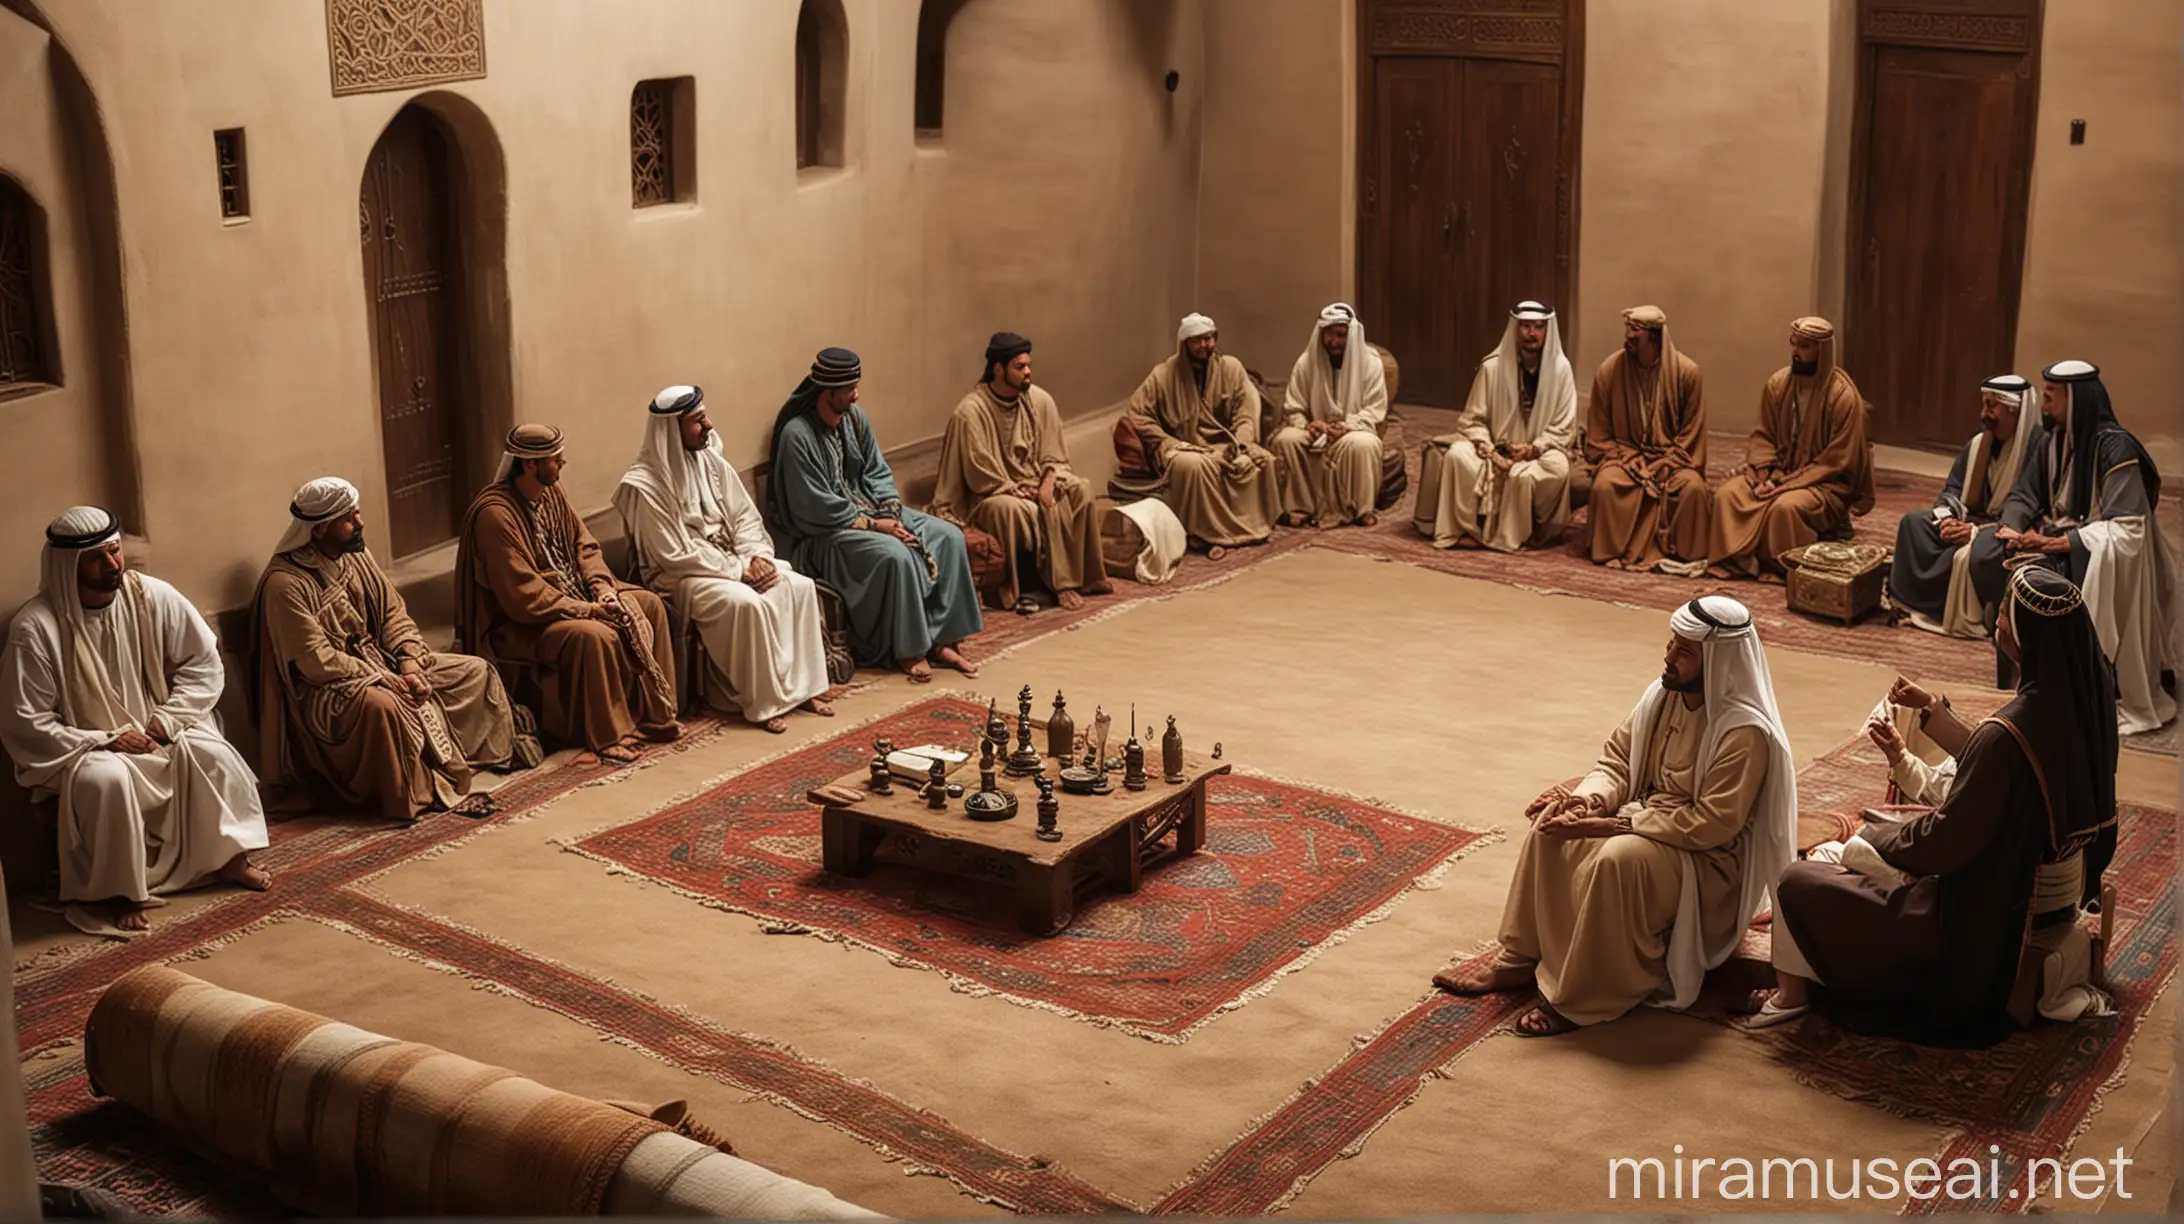 600AD Arabian meeting small group in room, in judging court